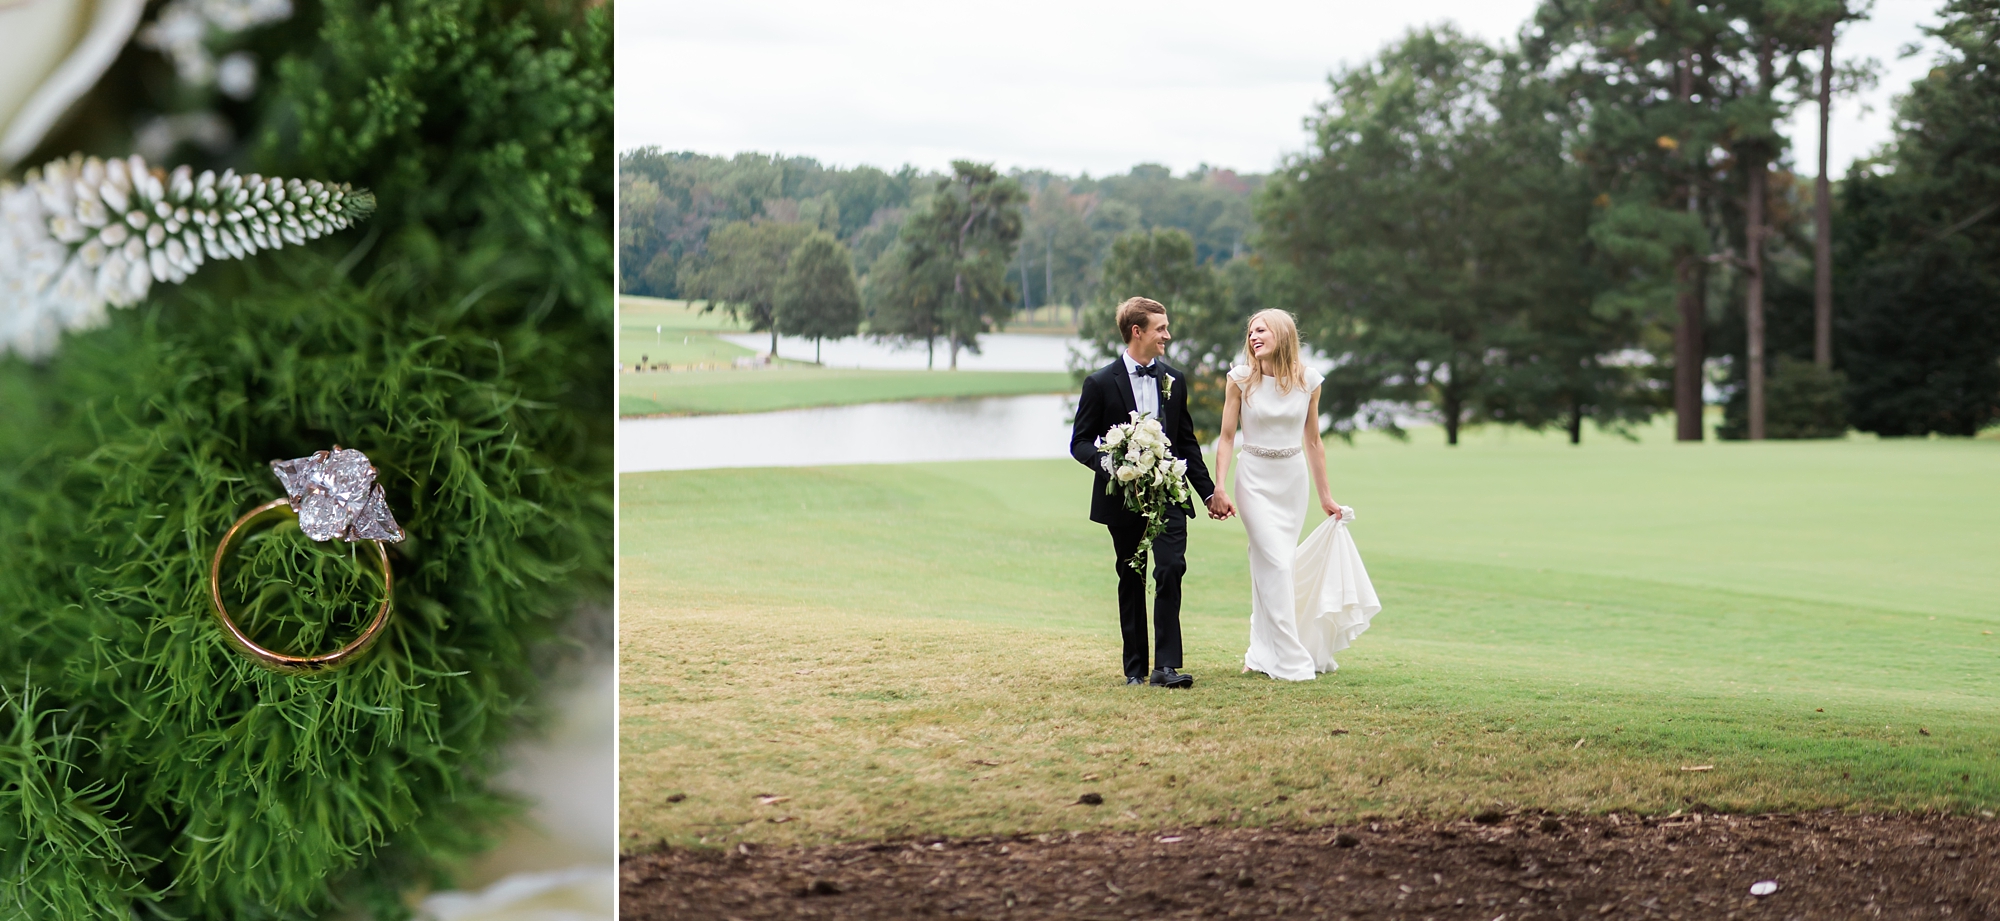 Bride and Groom Portraits at East Lake Golf Club by Top Atlanta Wedding Photographers Leigh and Becca